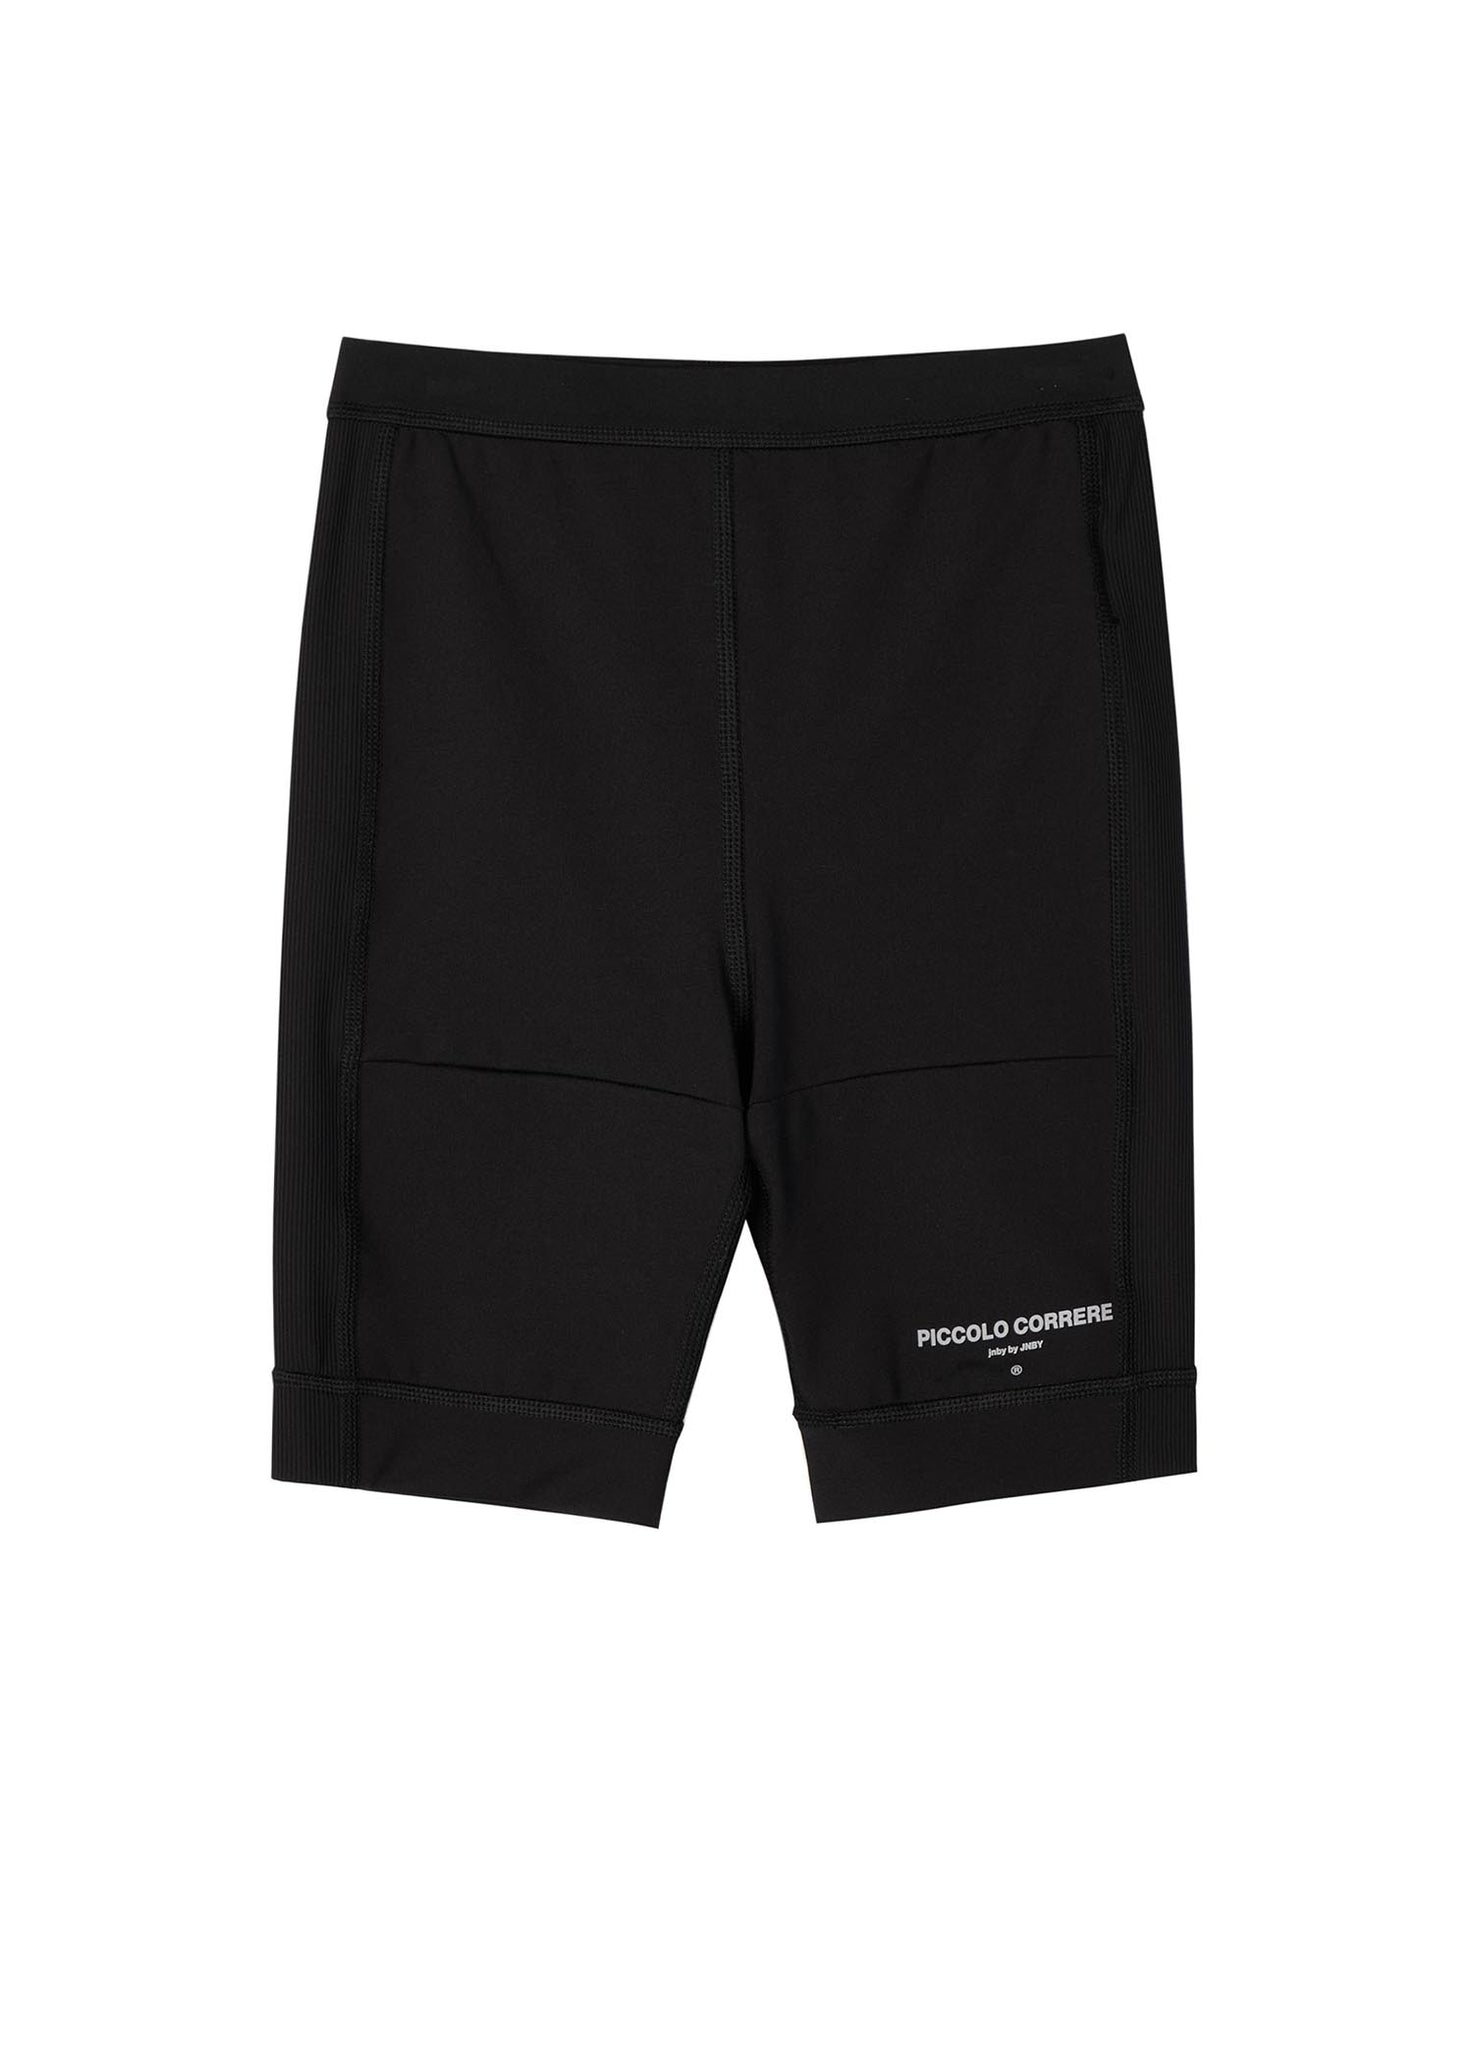 Pants / jnby by JNBY Slim Fit Mid Length Shorts